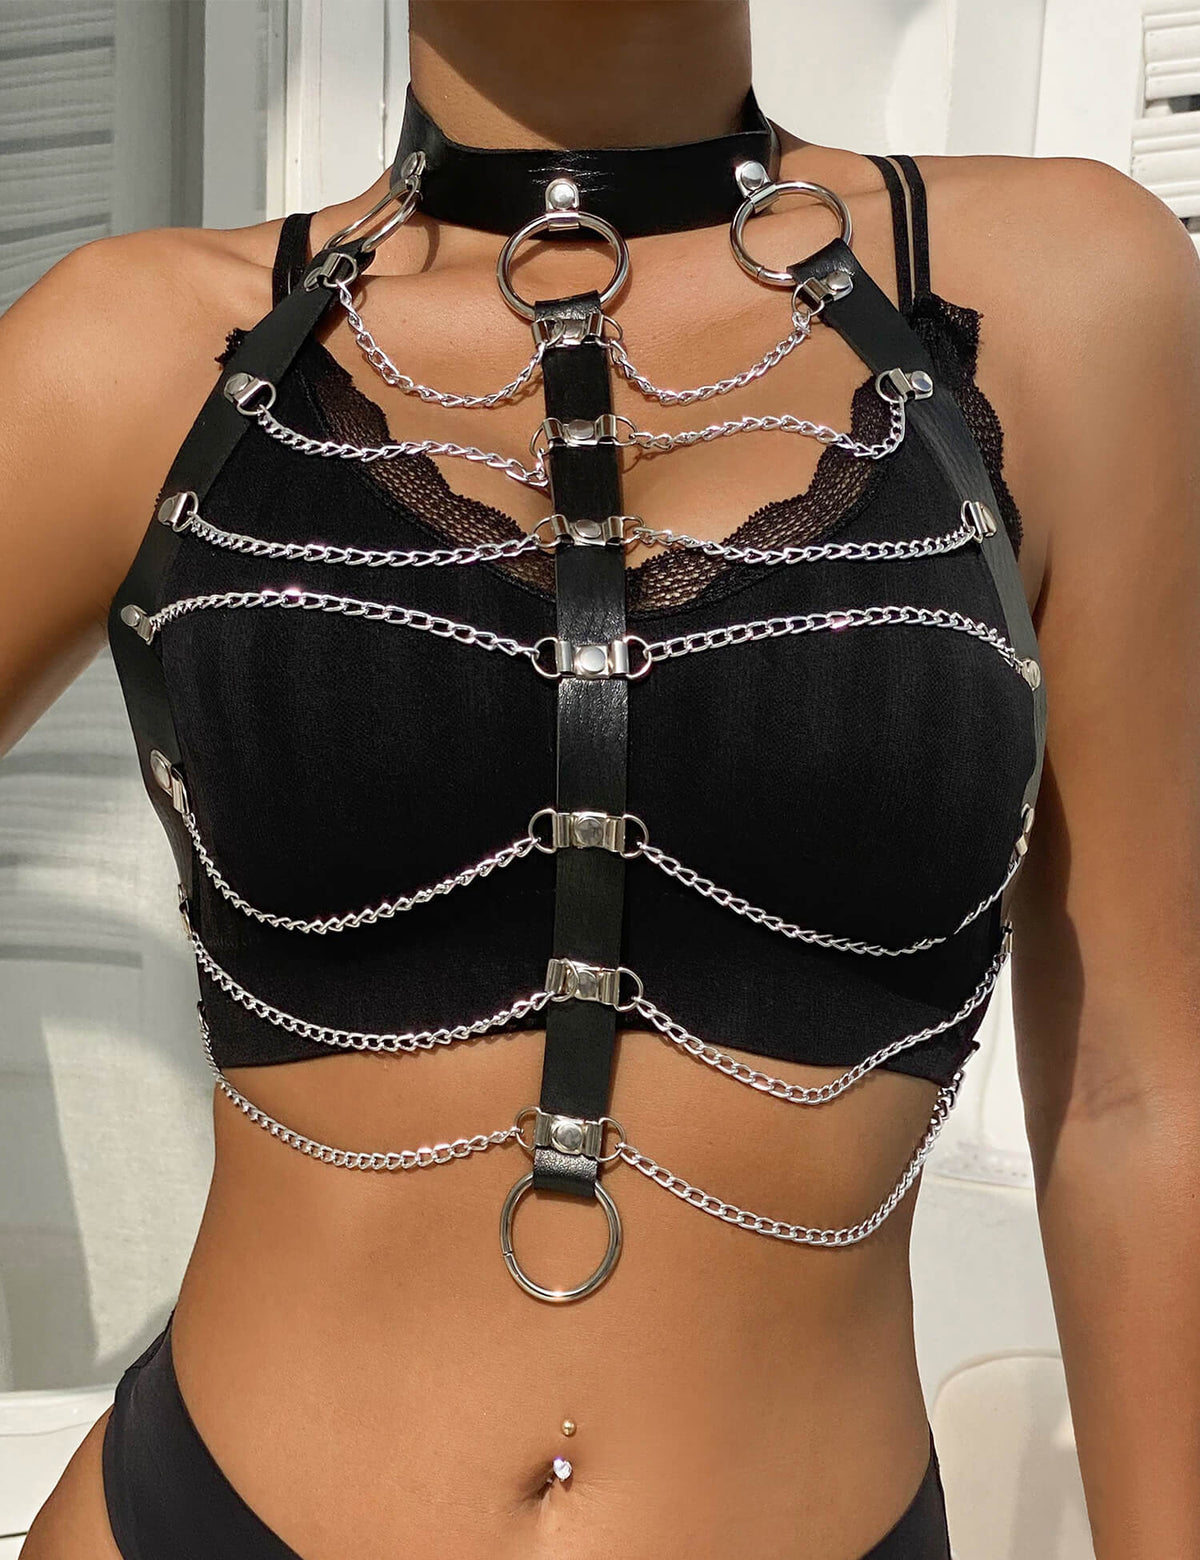 Punk_Leather_Chest_Harness_Body_Chain_C81072_1